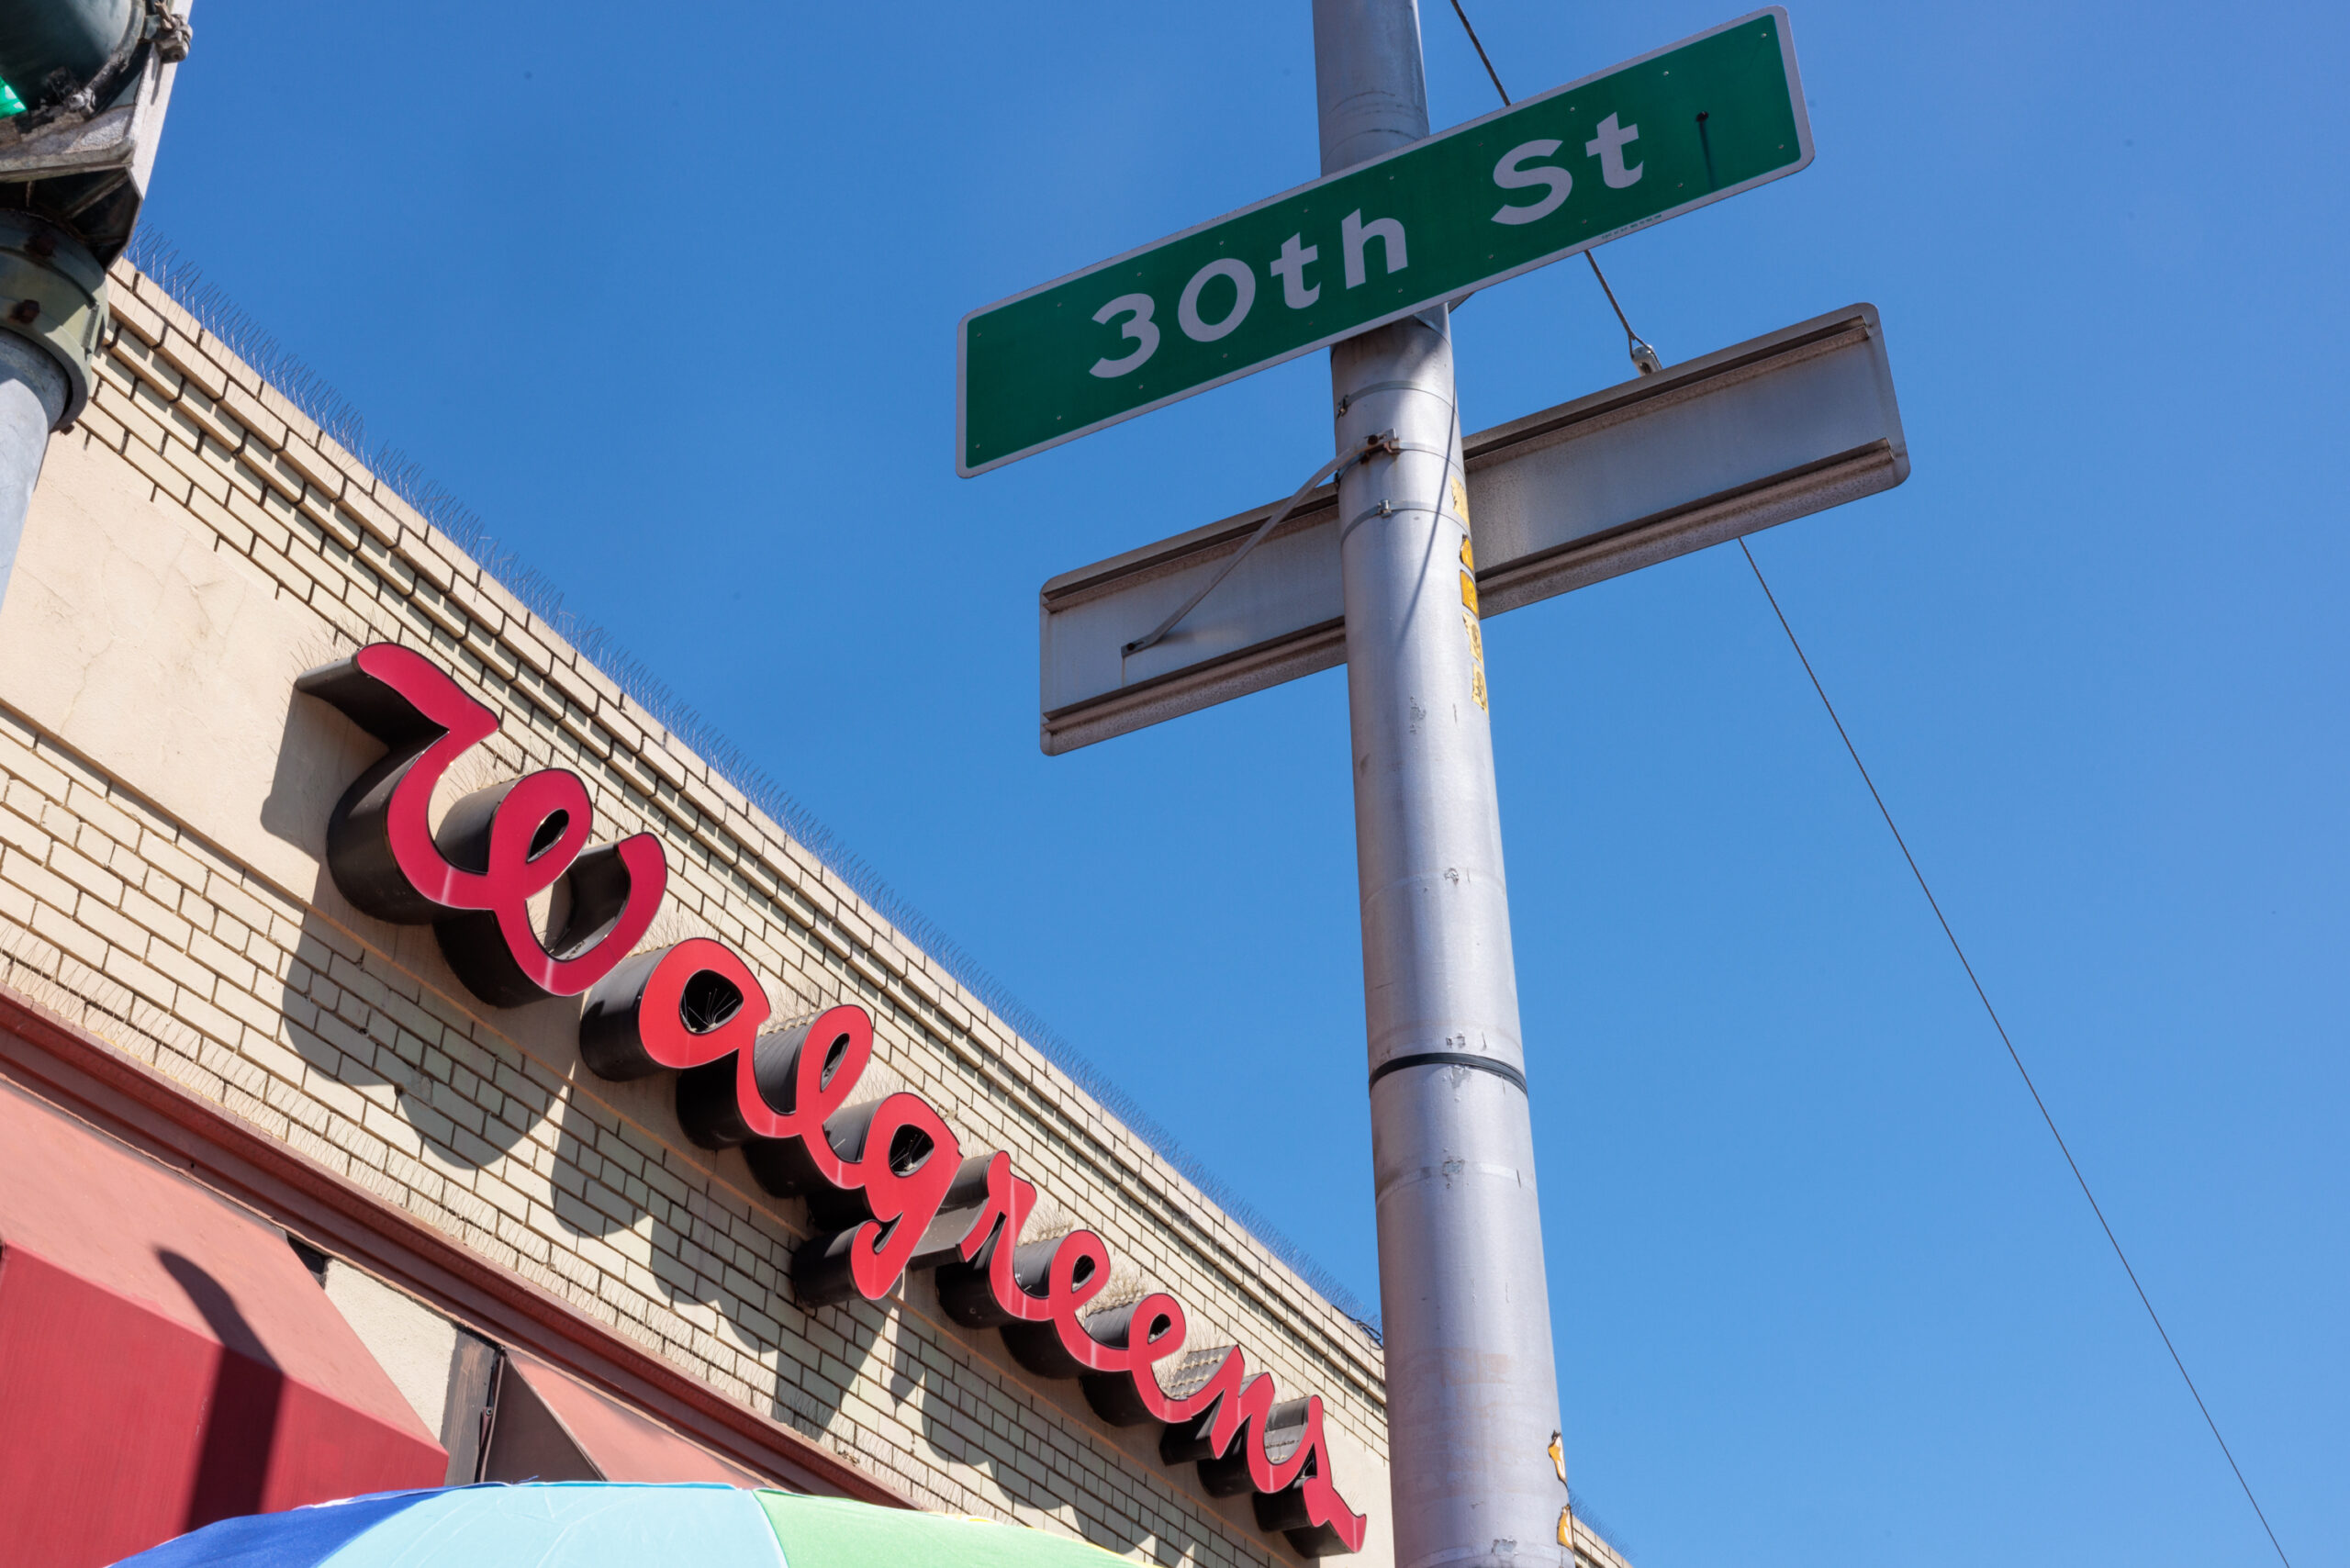 Street signs "30th St" and a Walgreens store with a red sign on a brick building, under a clear blue sky.